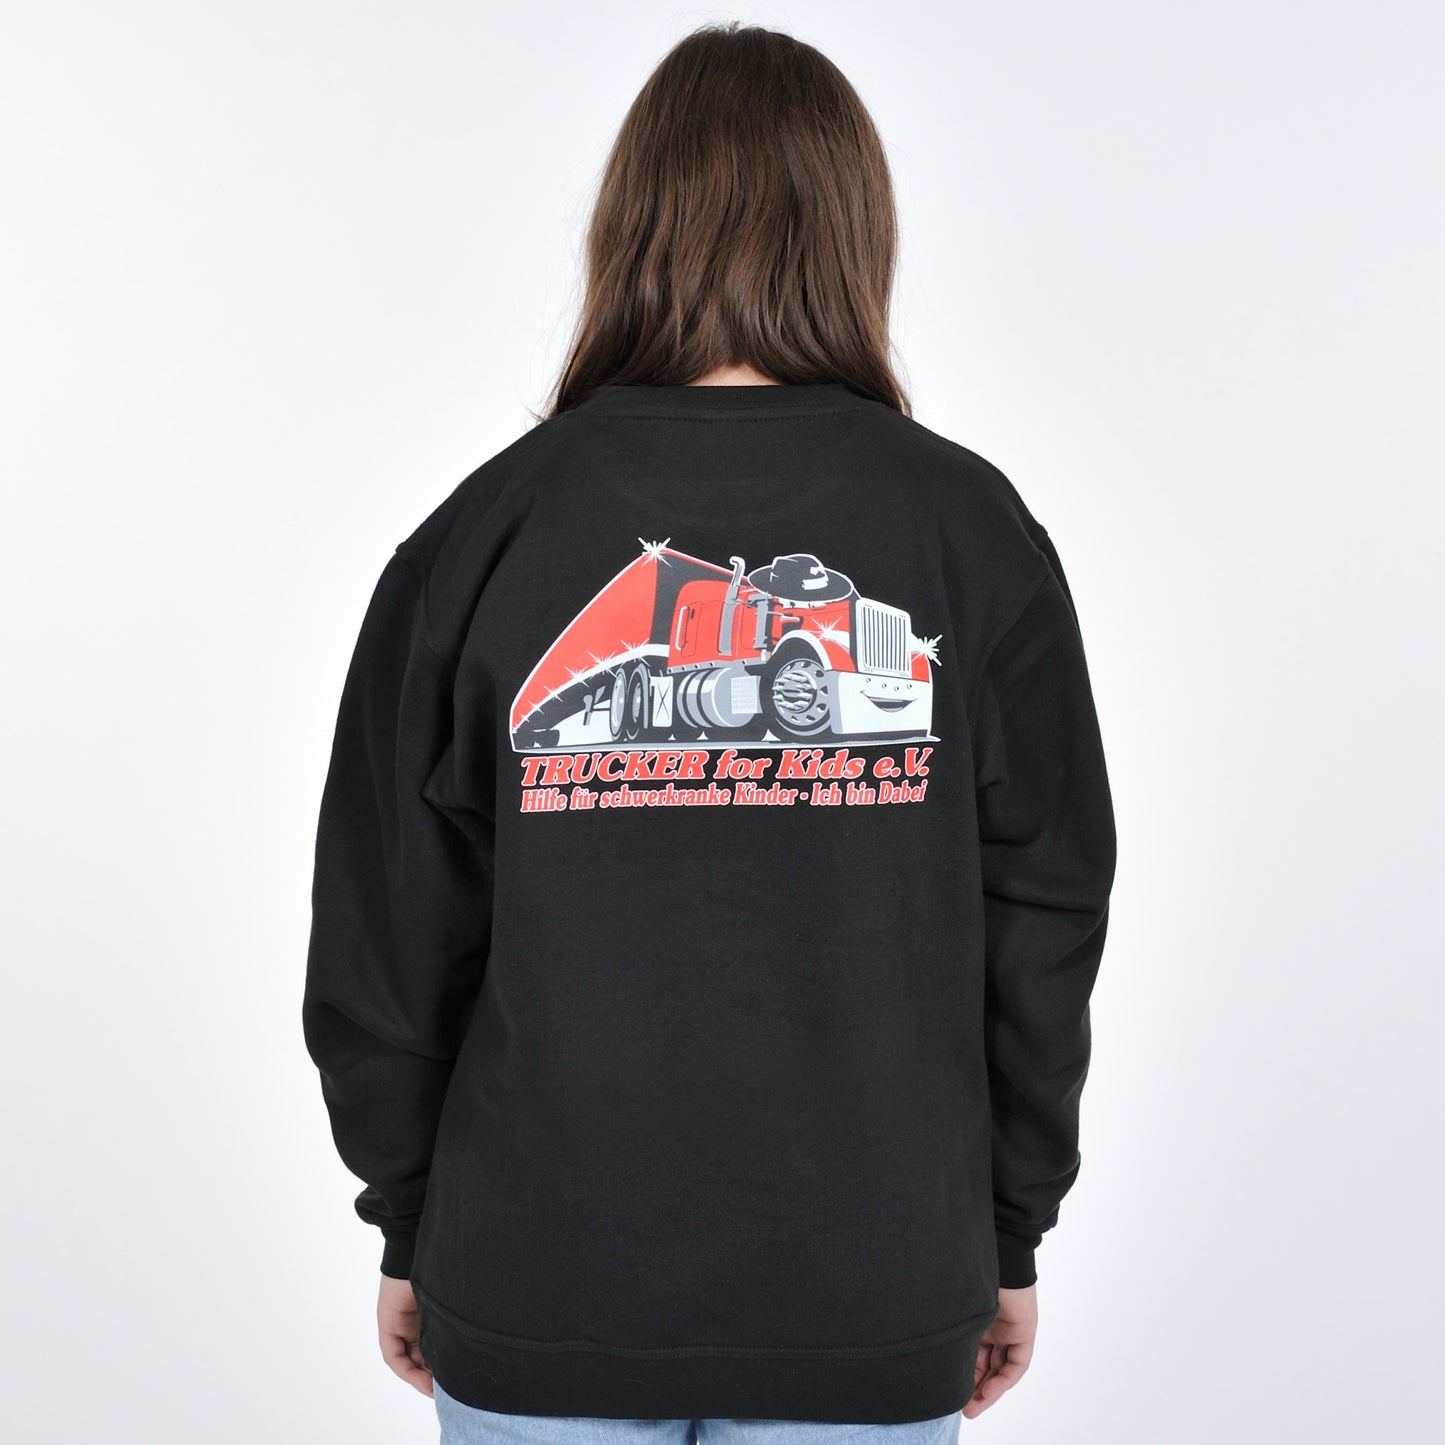 Club sweatshirt for men &amp; women Old price €35.50 now only €30.50